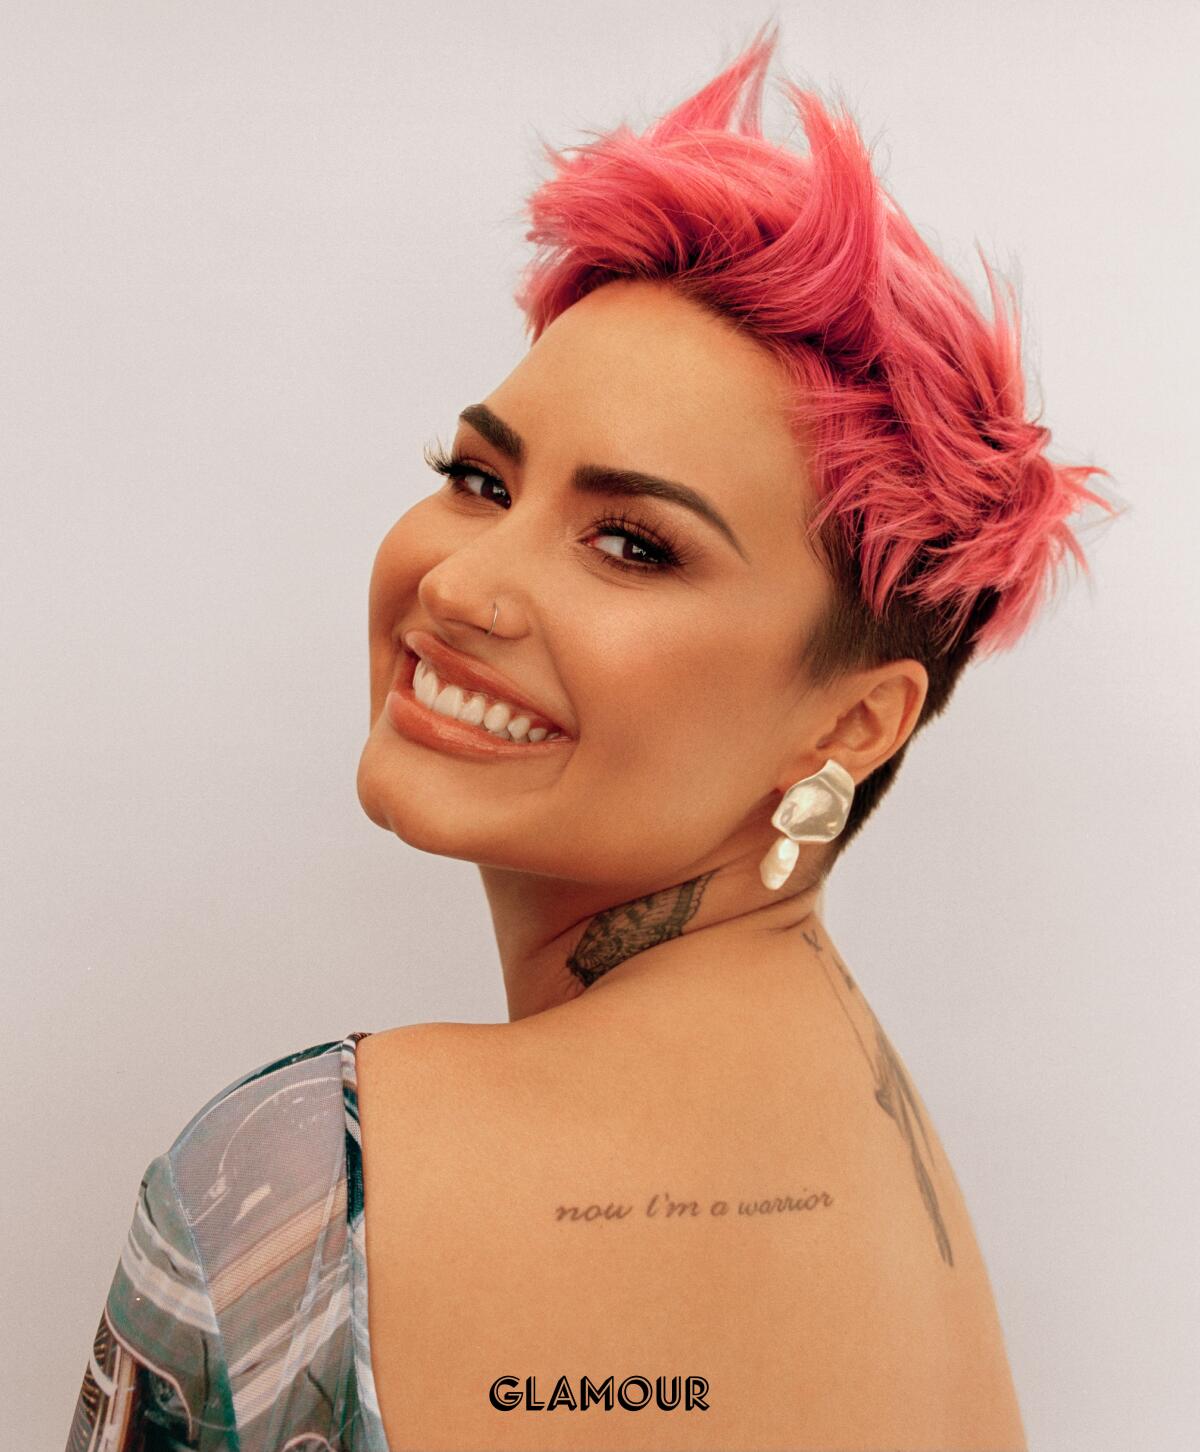 Demi Lovato, with short pink hair, looks over her shoulder at the camera